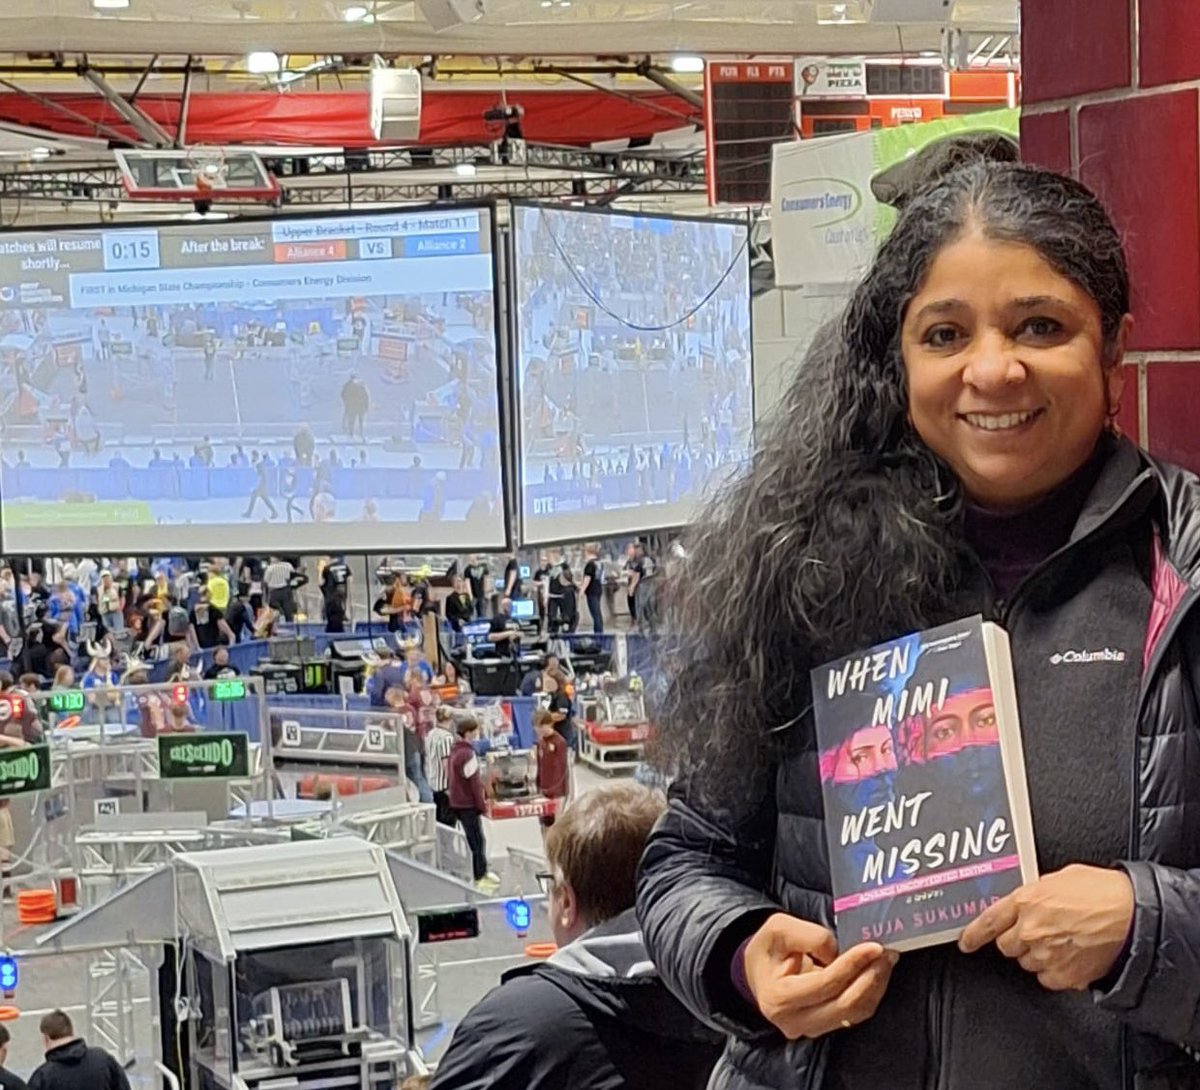 Continuing my “tour” of #michigan spots where my debut #YA #thriller WHEN MIMI WENT MISSING is set. This is the states competition for First Robotics at Saginaw. It was truly exhilarating watching the bots compete and how brilliant & focused these kids are! #FRC #bipoc